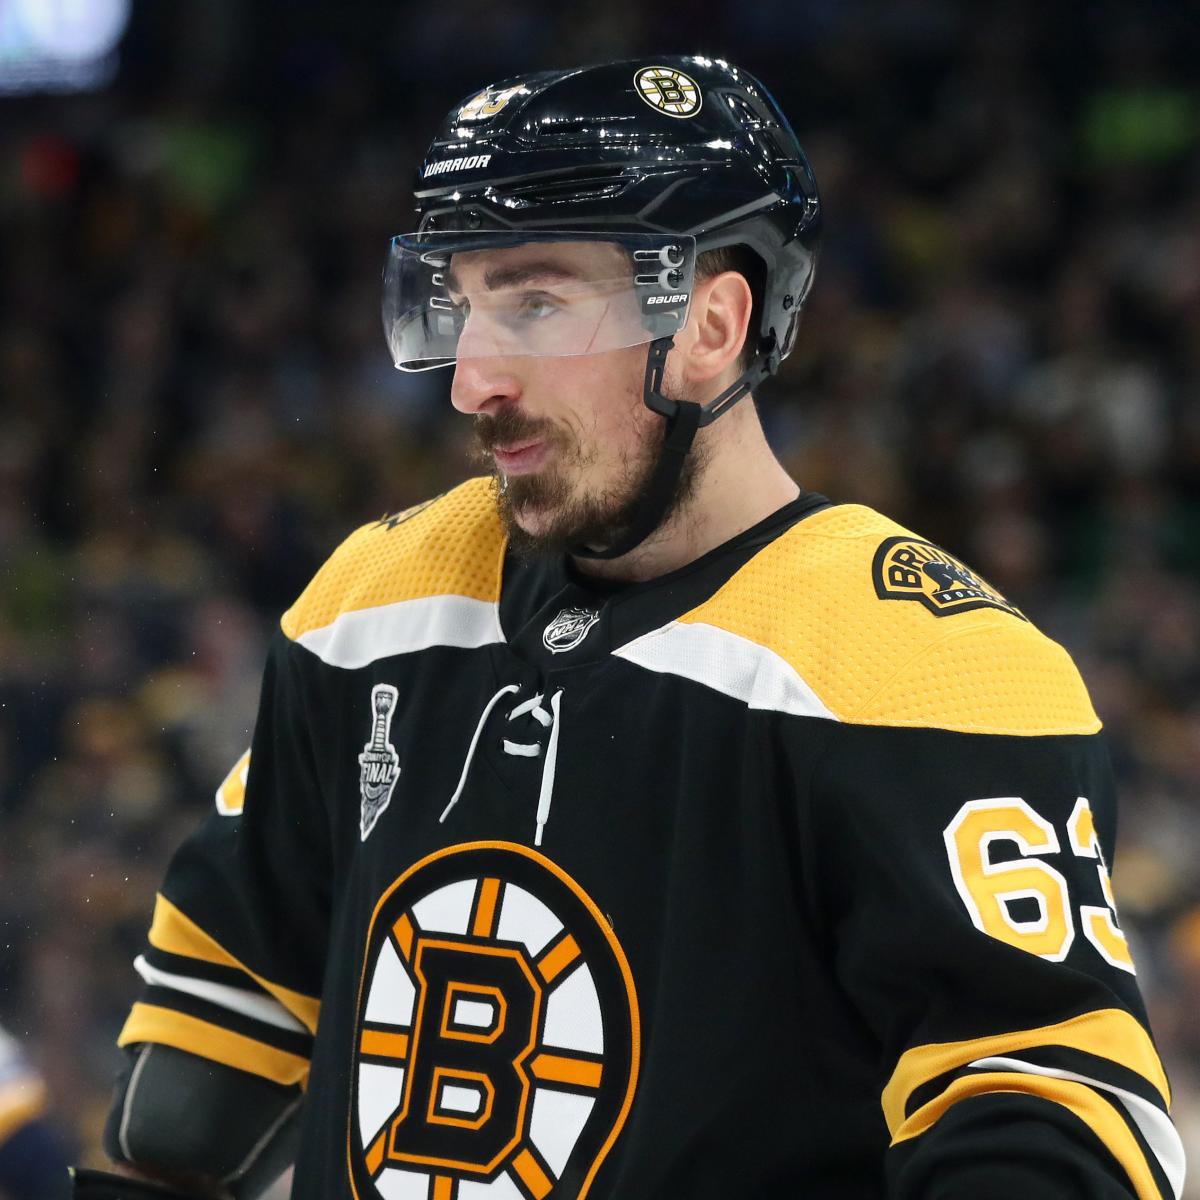 Life after 'The Lick': Is the Bruins' Brad Marchand on the other side of